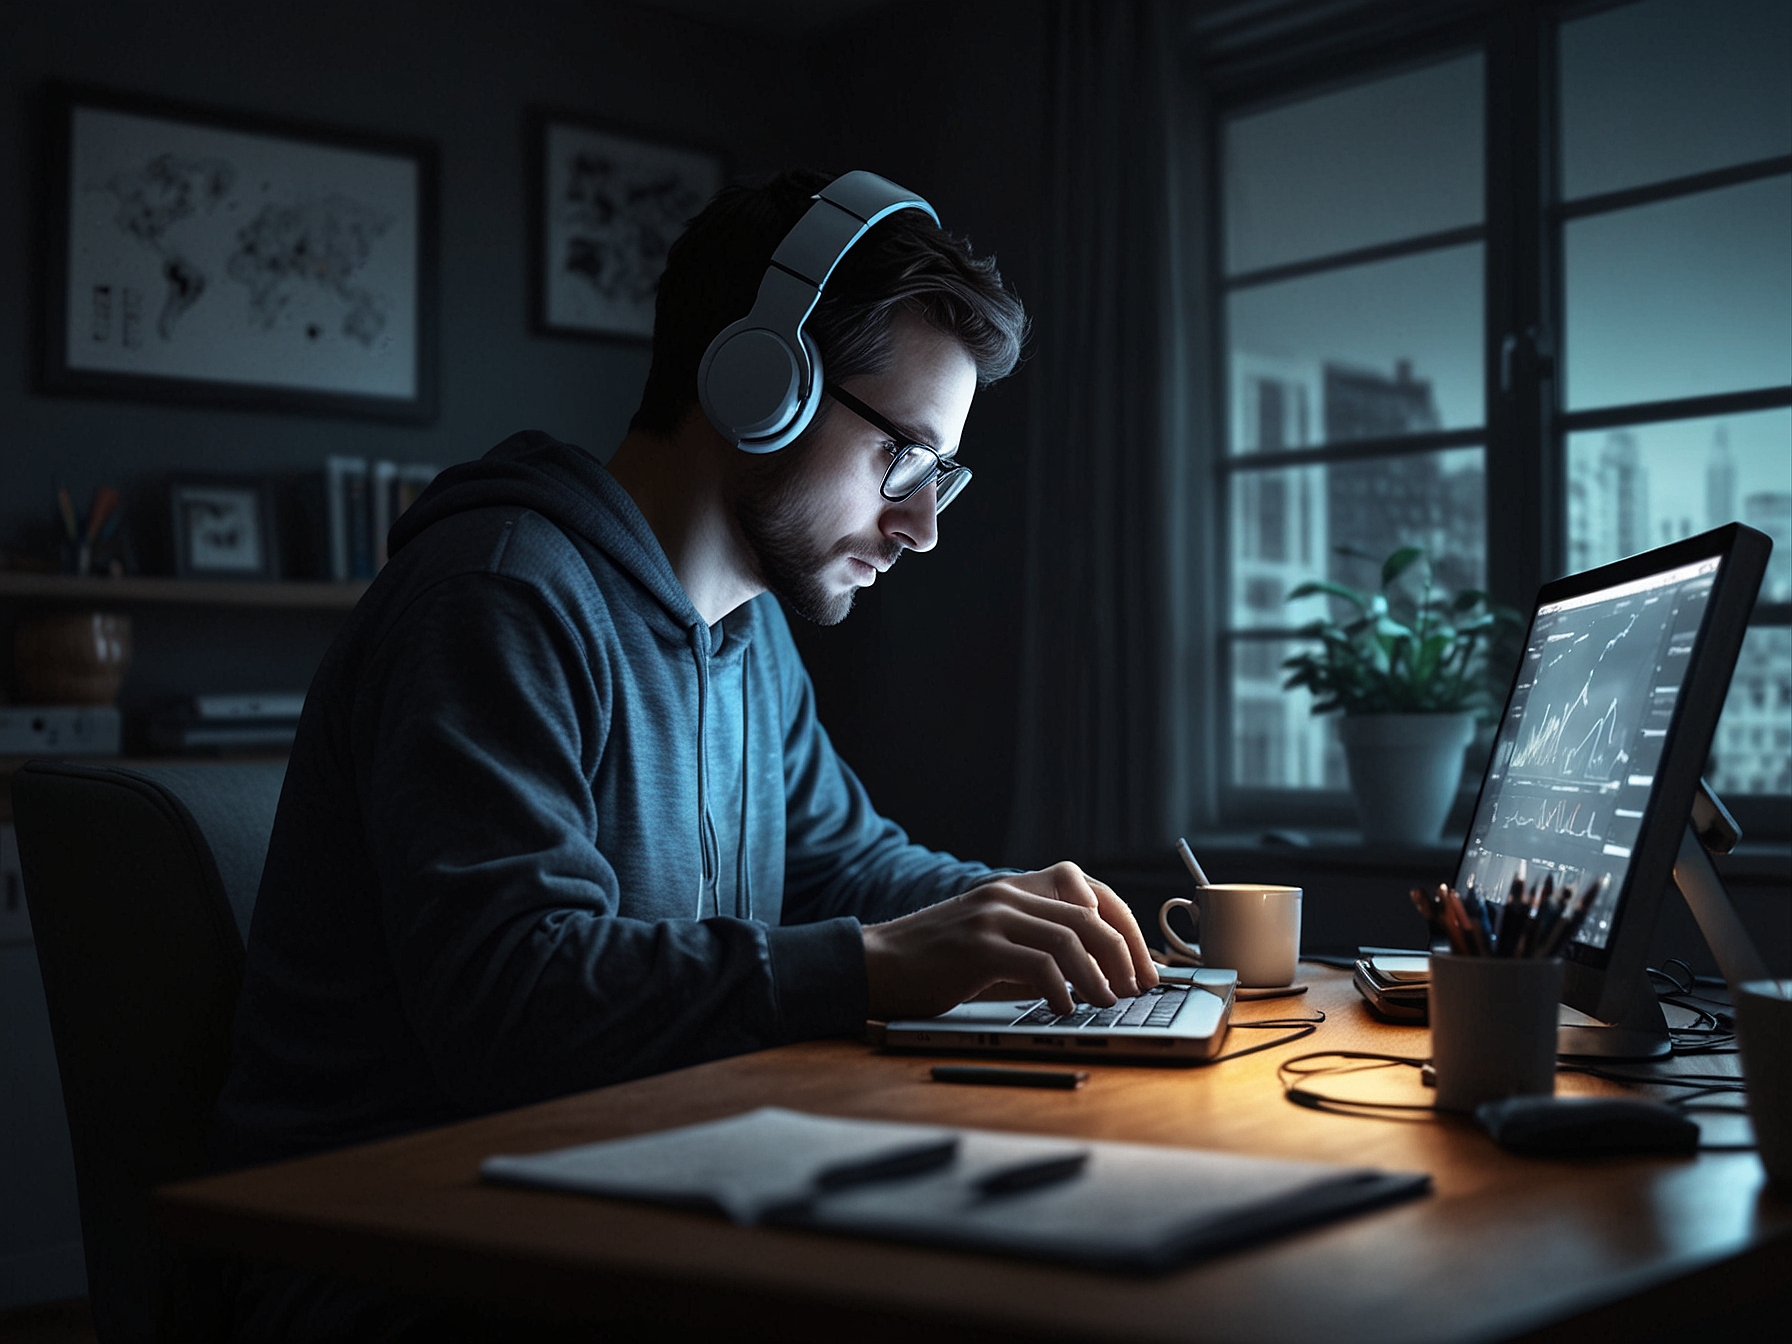 An image depicting a person working from home with multiple electronic devices, highlighting the increased energy usage due to the remote work trend accelerated by the pandemic.